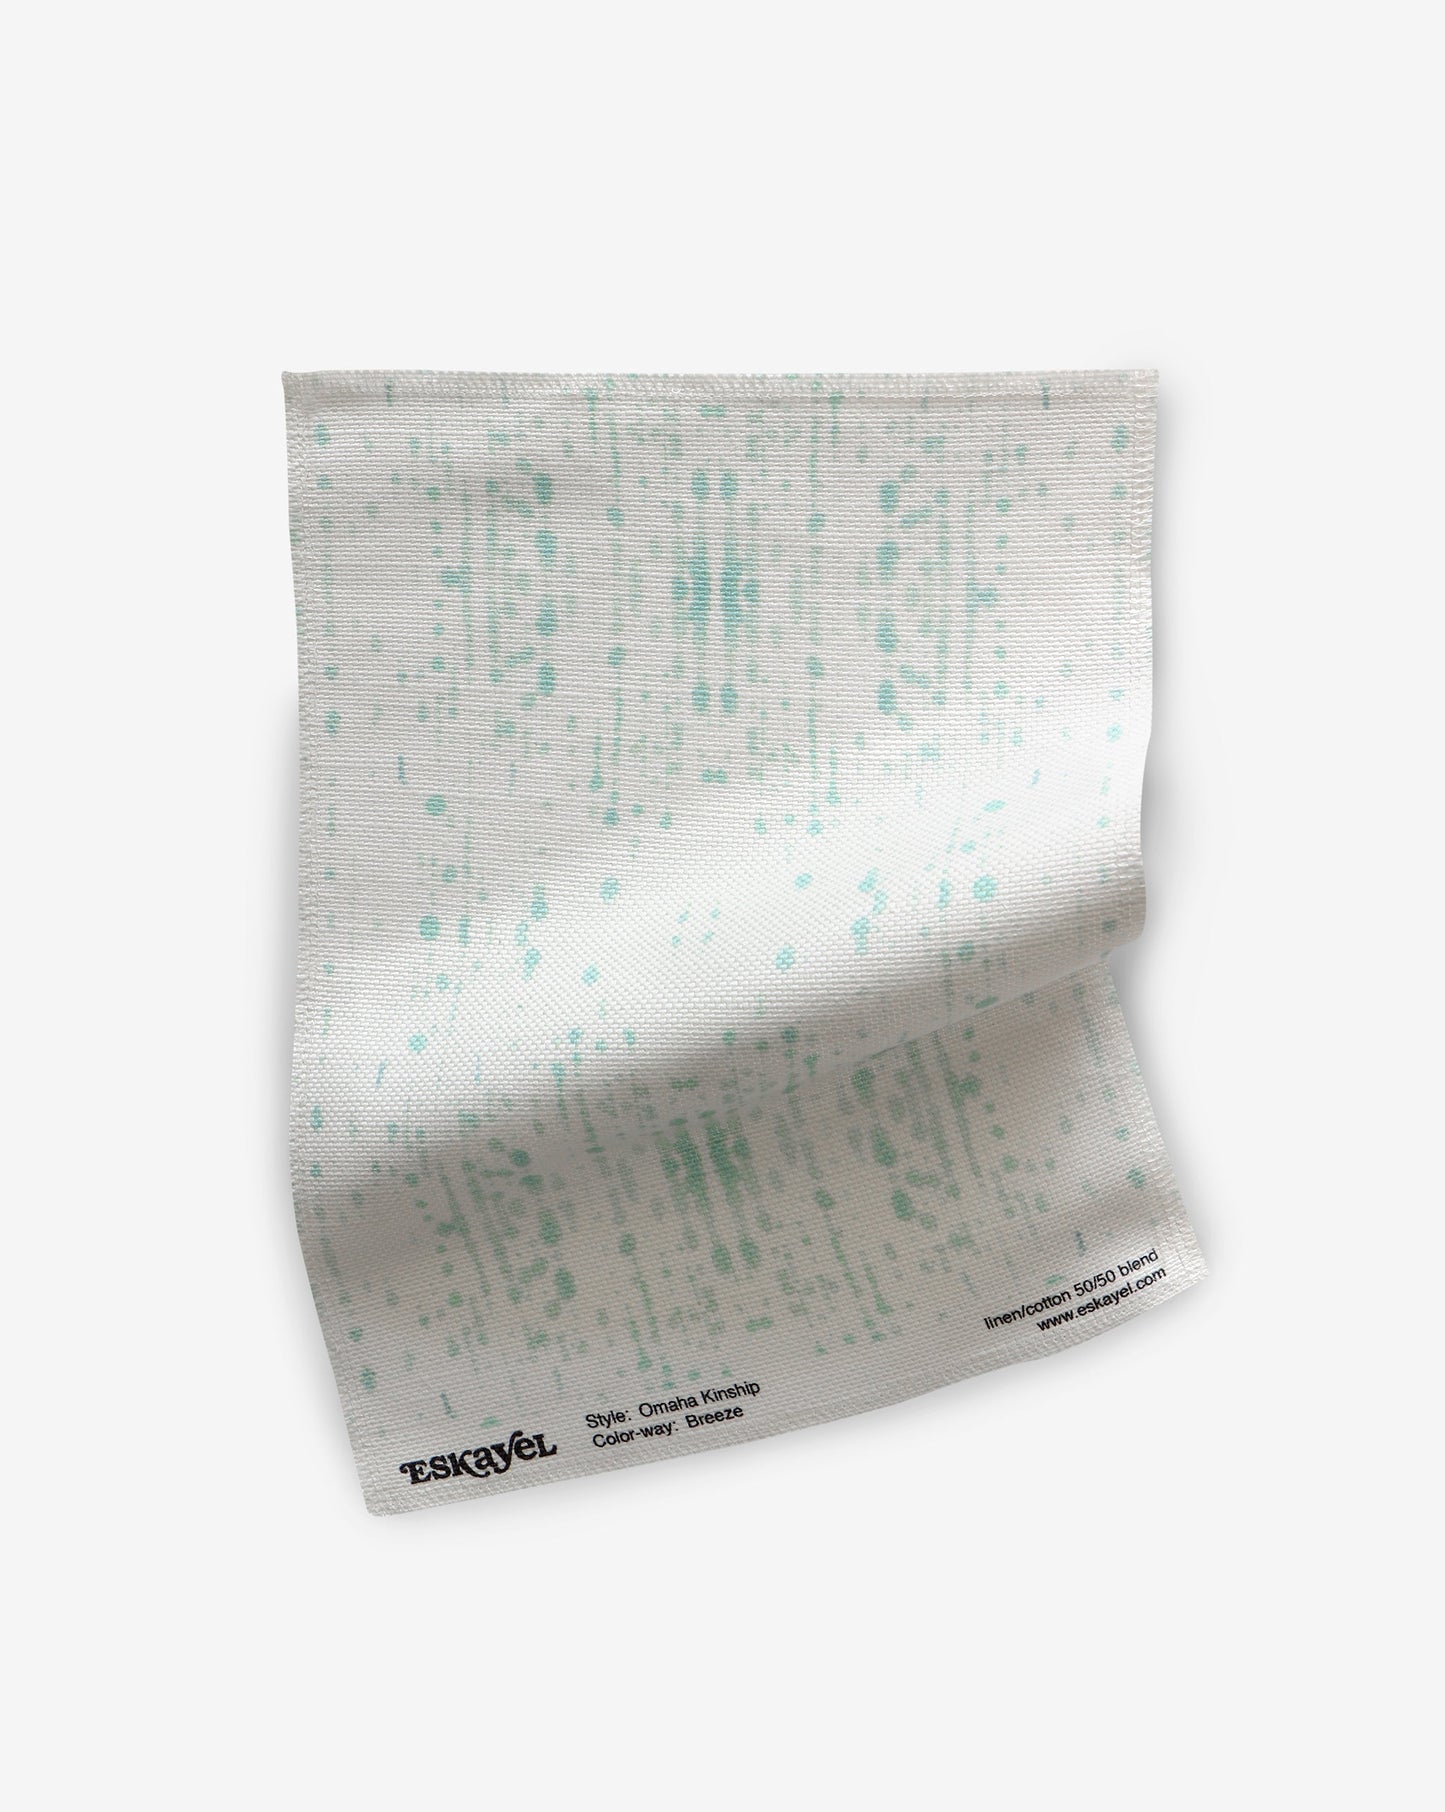 A white Omaha Kinship Fabric Sample Breeze with dots on it, suitable for order